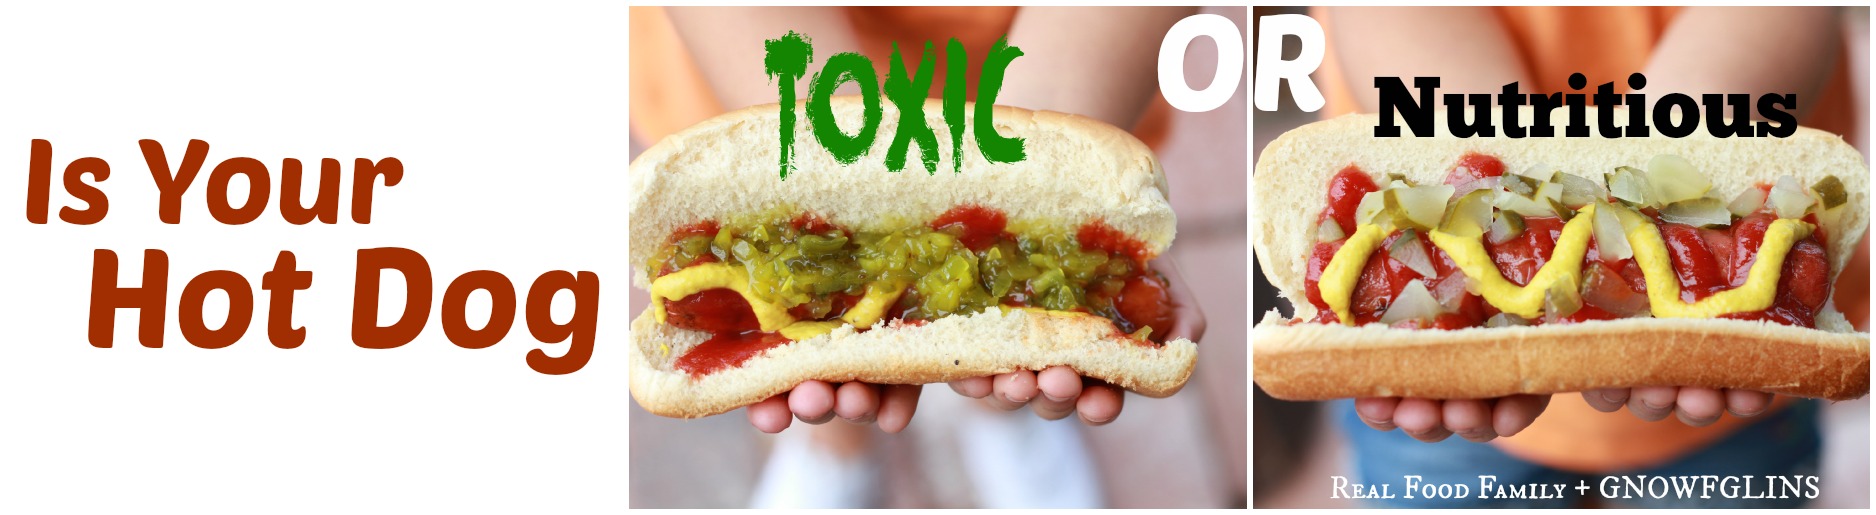 Is Your Hot Dog TOXIC or Nutritious?